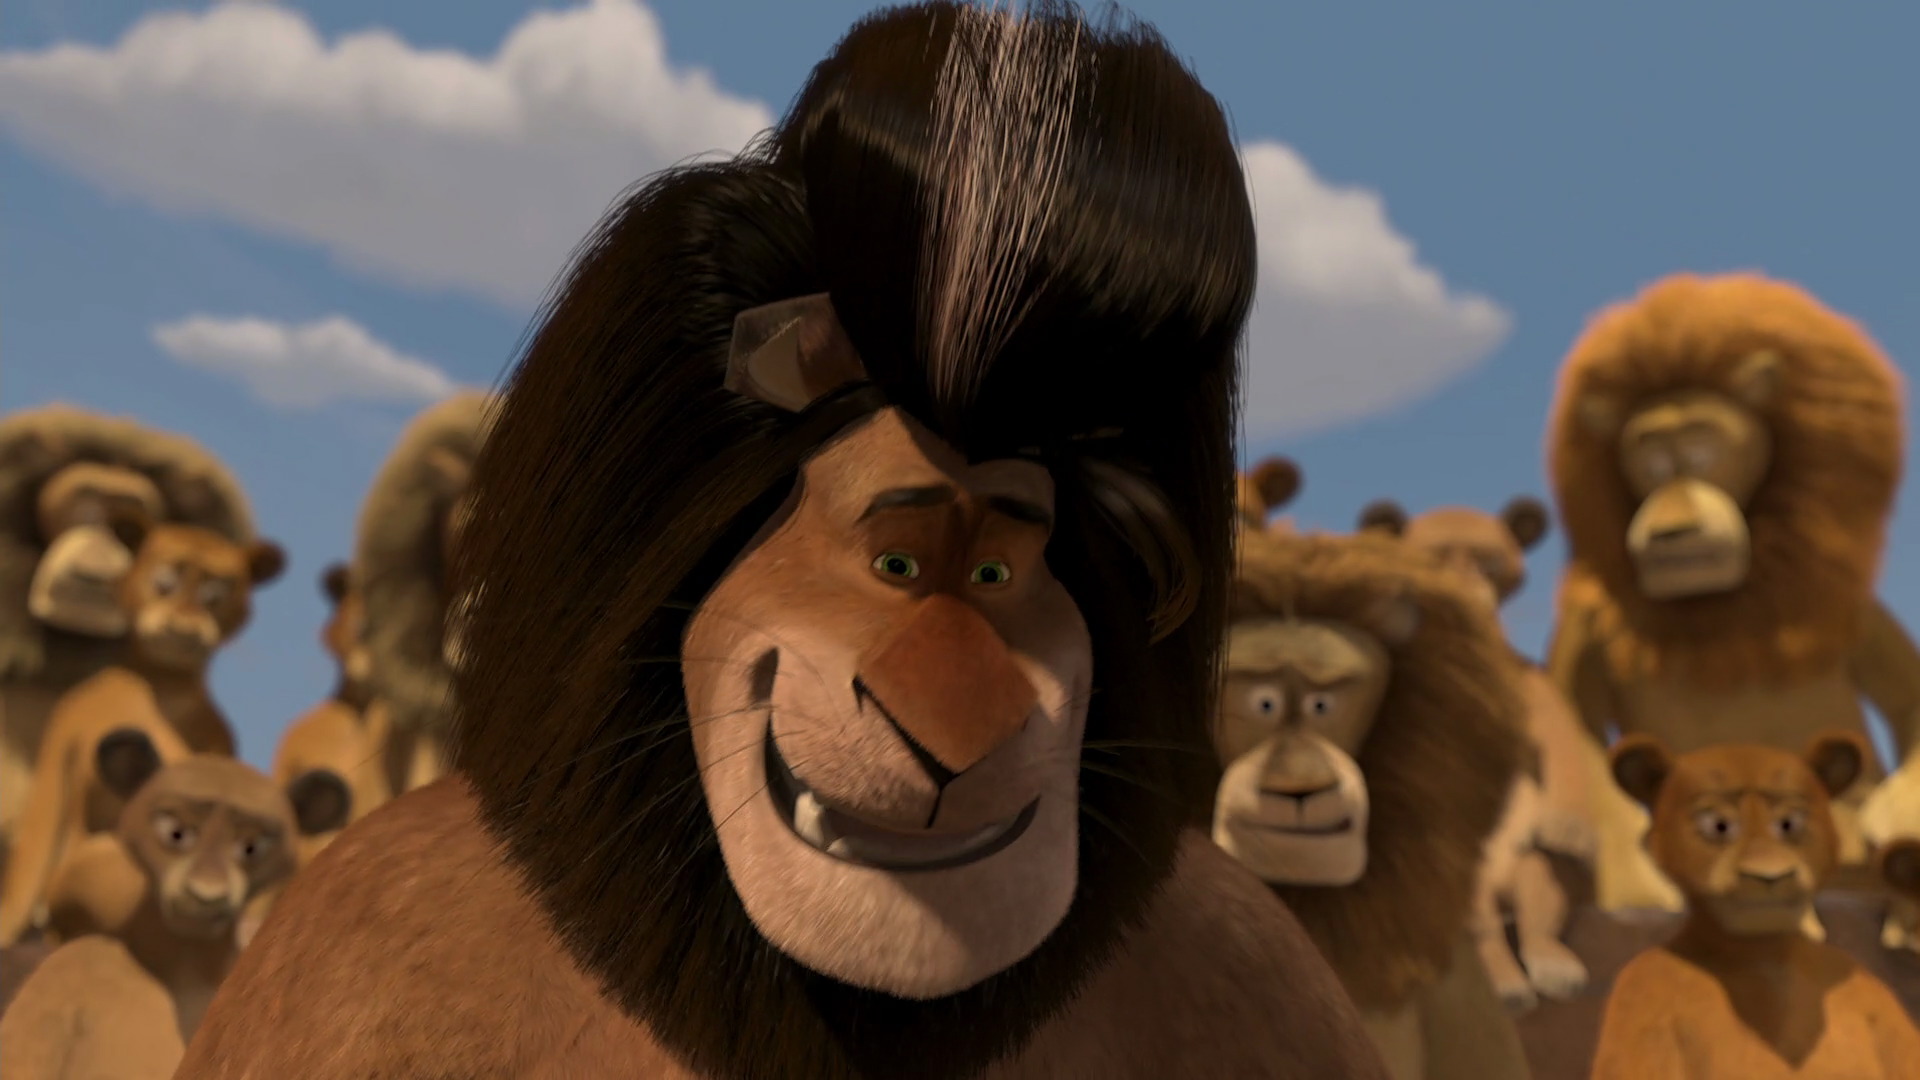 Not to be confused with alex the lion from madagascar, the character above ...